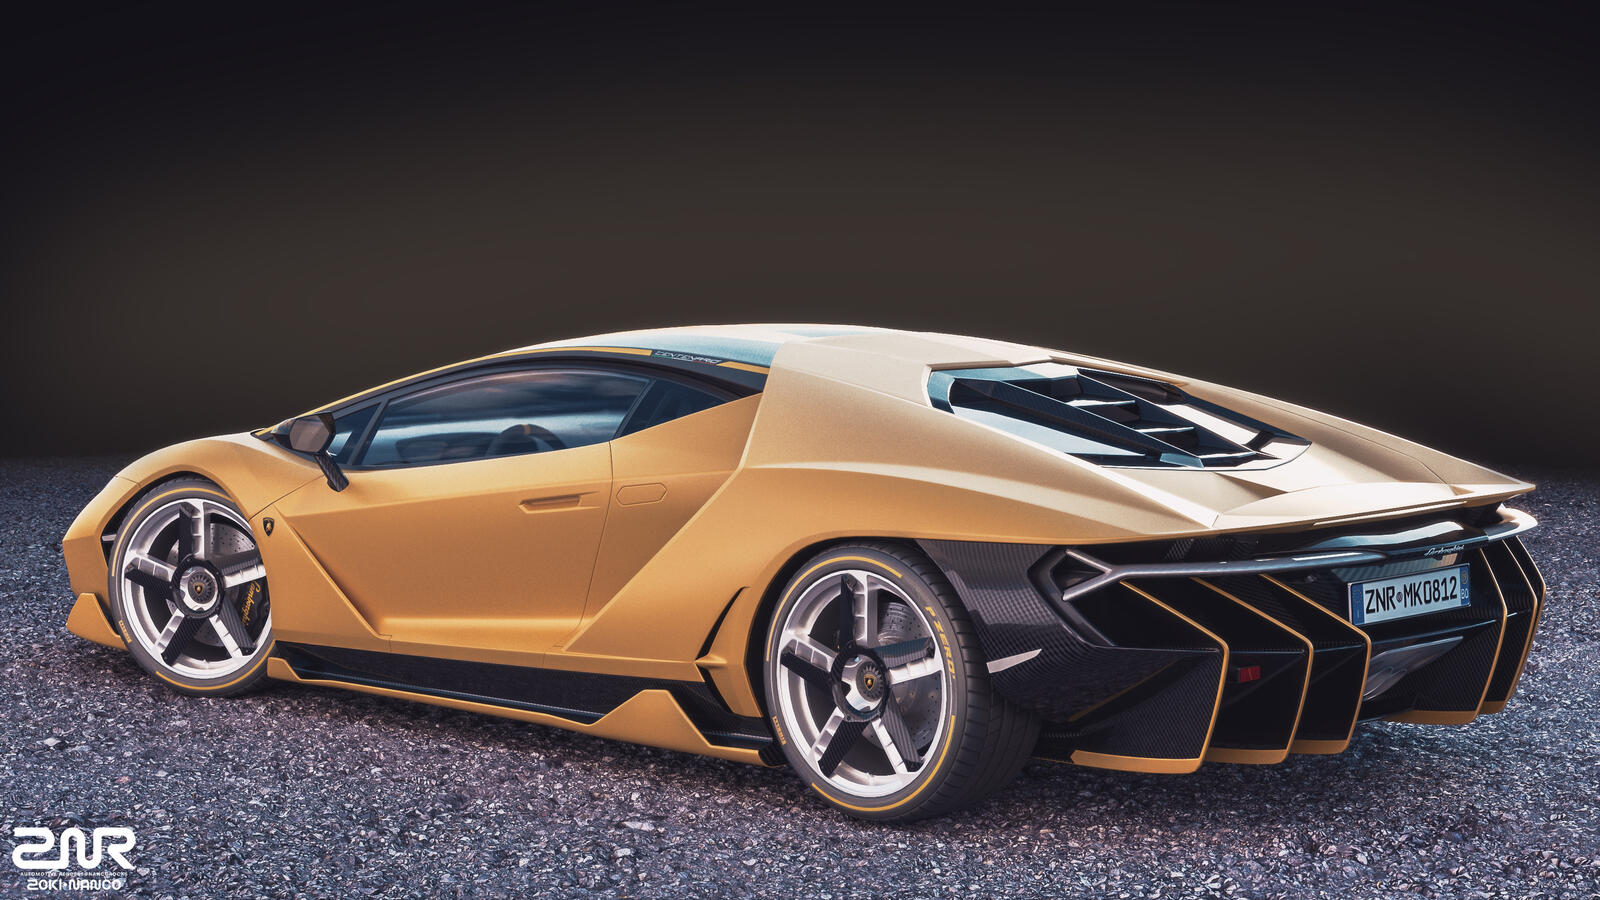 Wallpapers view from behind rear end Lamborghini Centenario on the desktop